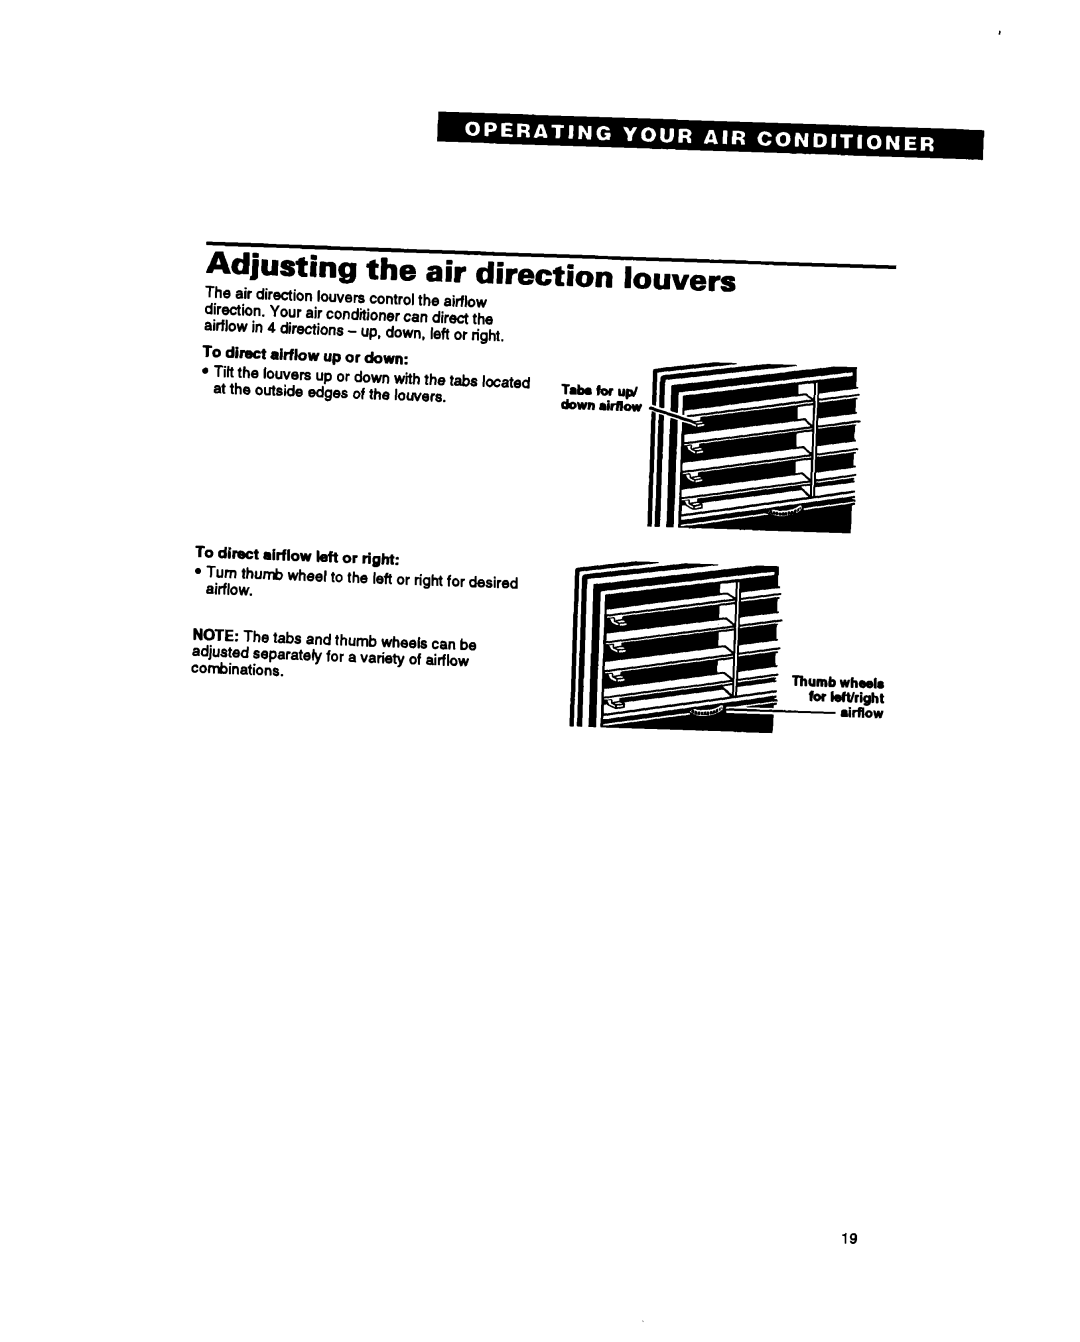 Whirlpool ACSIOZ ACS520 warranty Adjusting the air direction louvers 